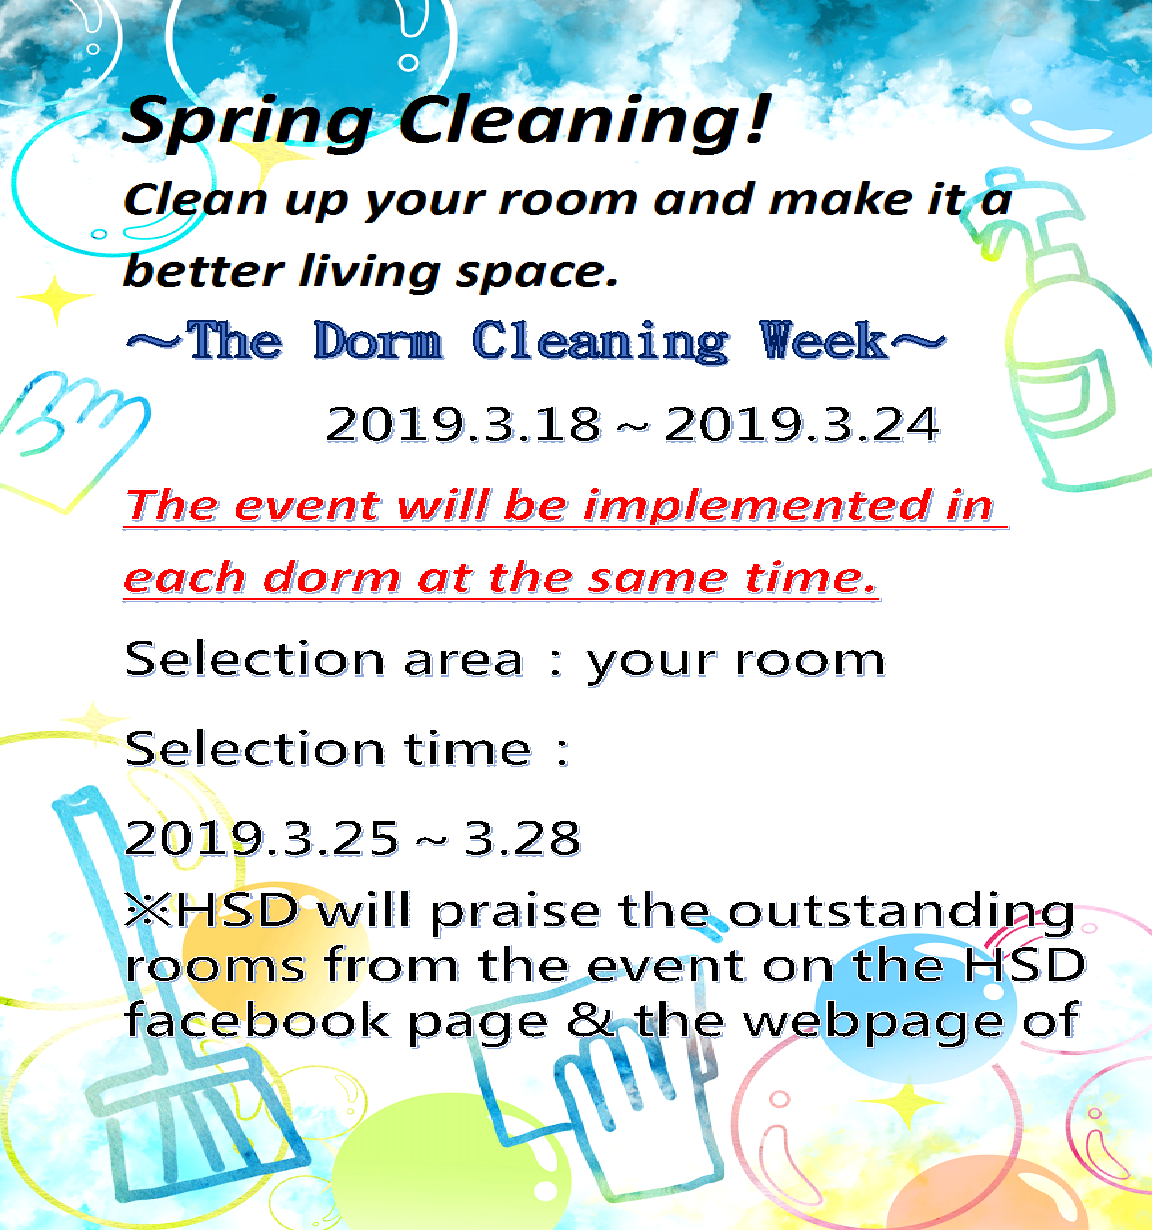 The Dorm Cleaning Week